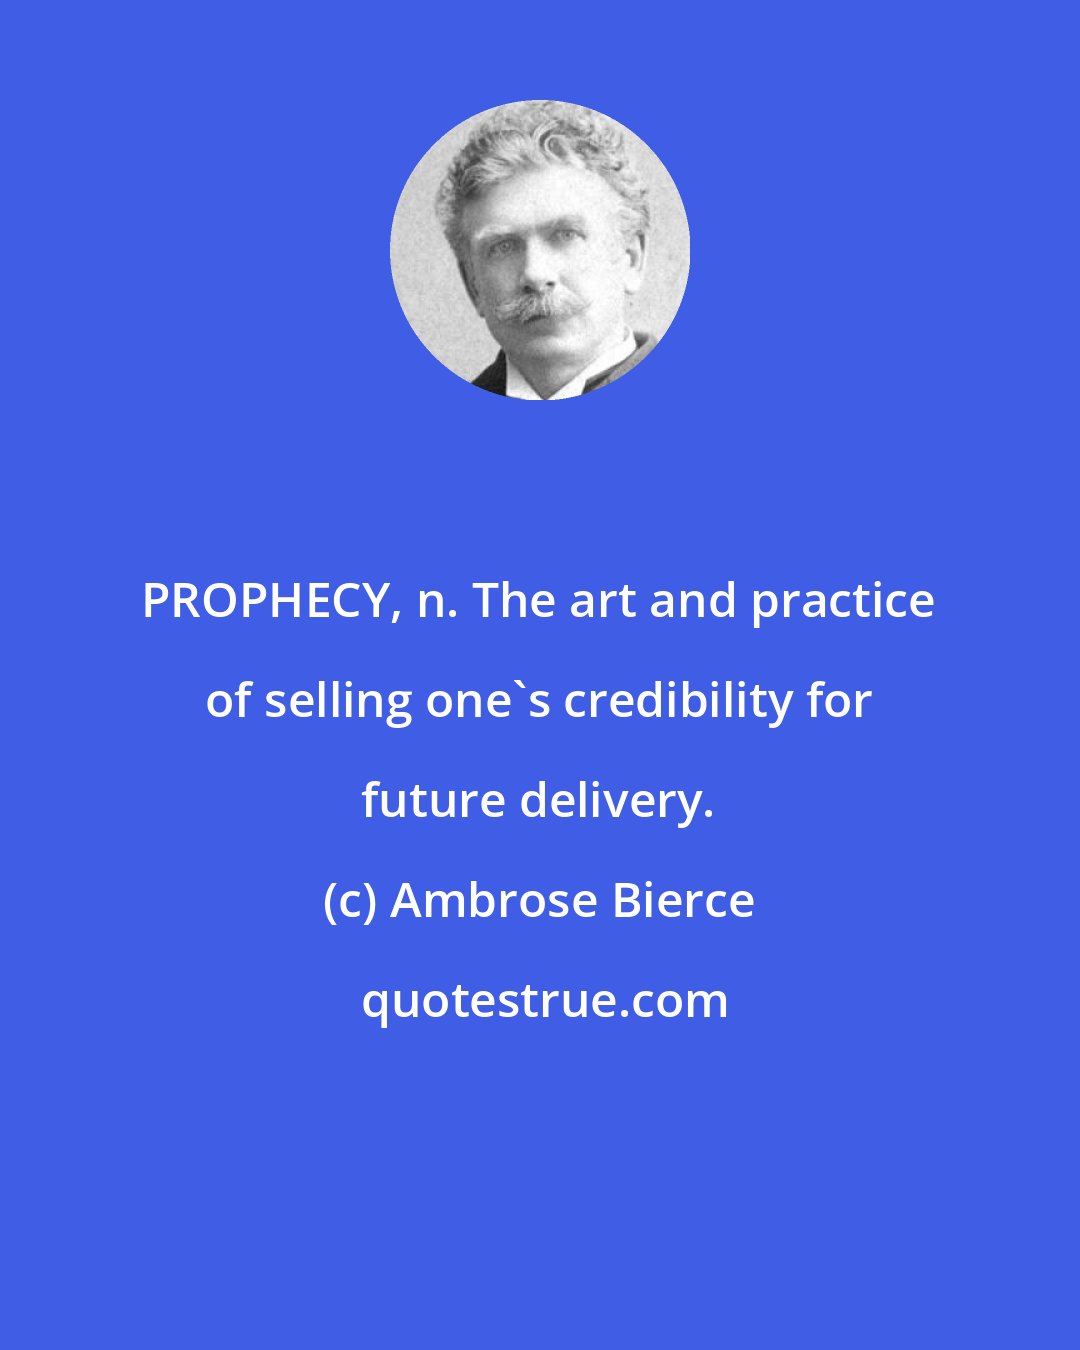 Ambrose Bierce: PROPHECY, n. The art and practice of selling one's credibility for future delivery.